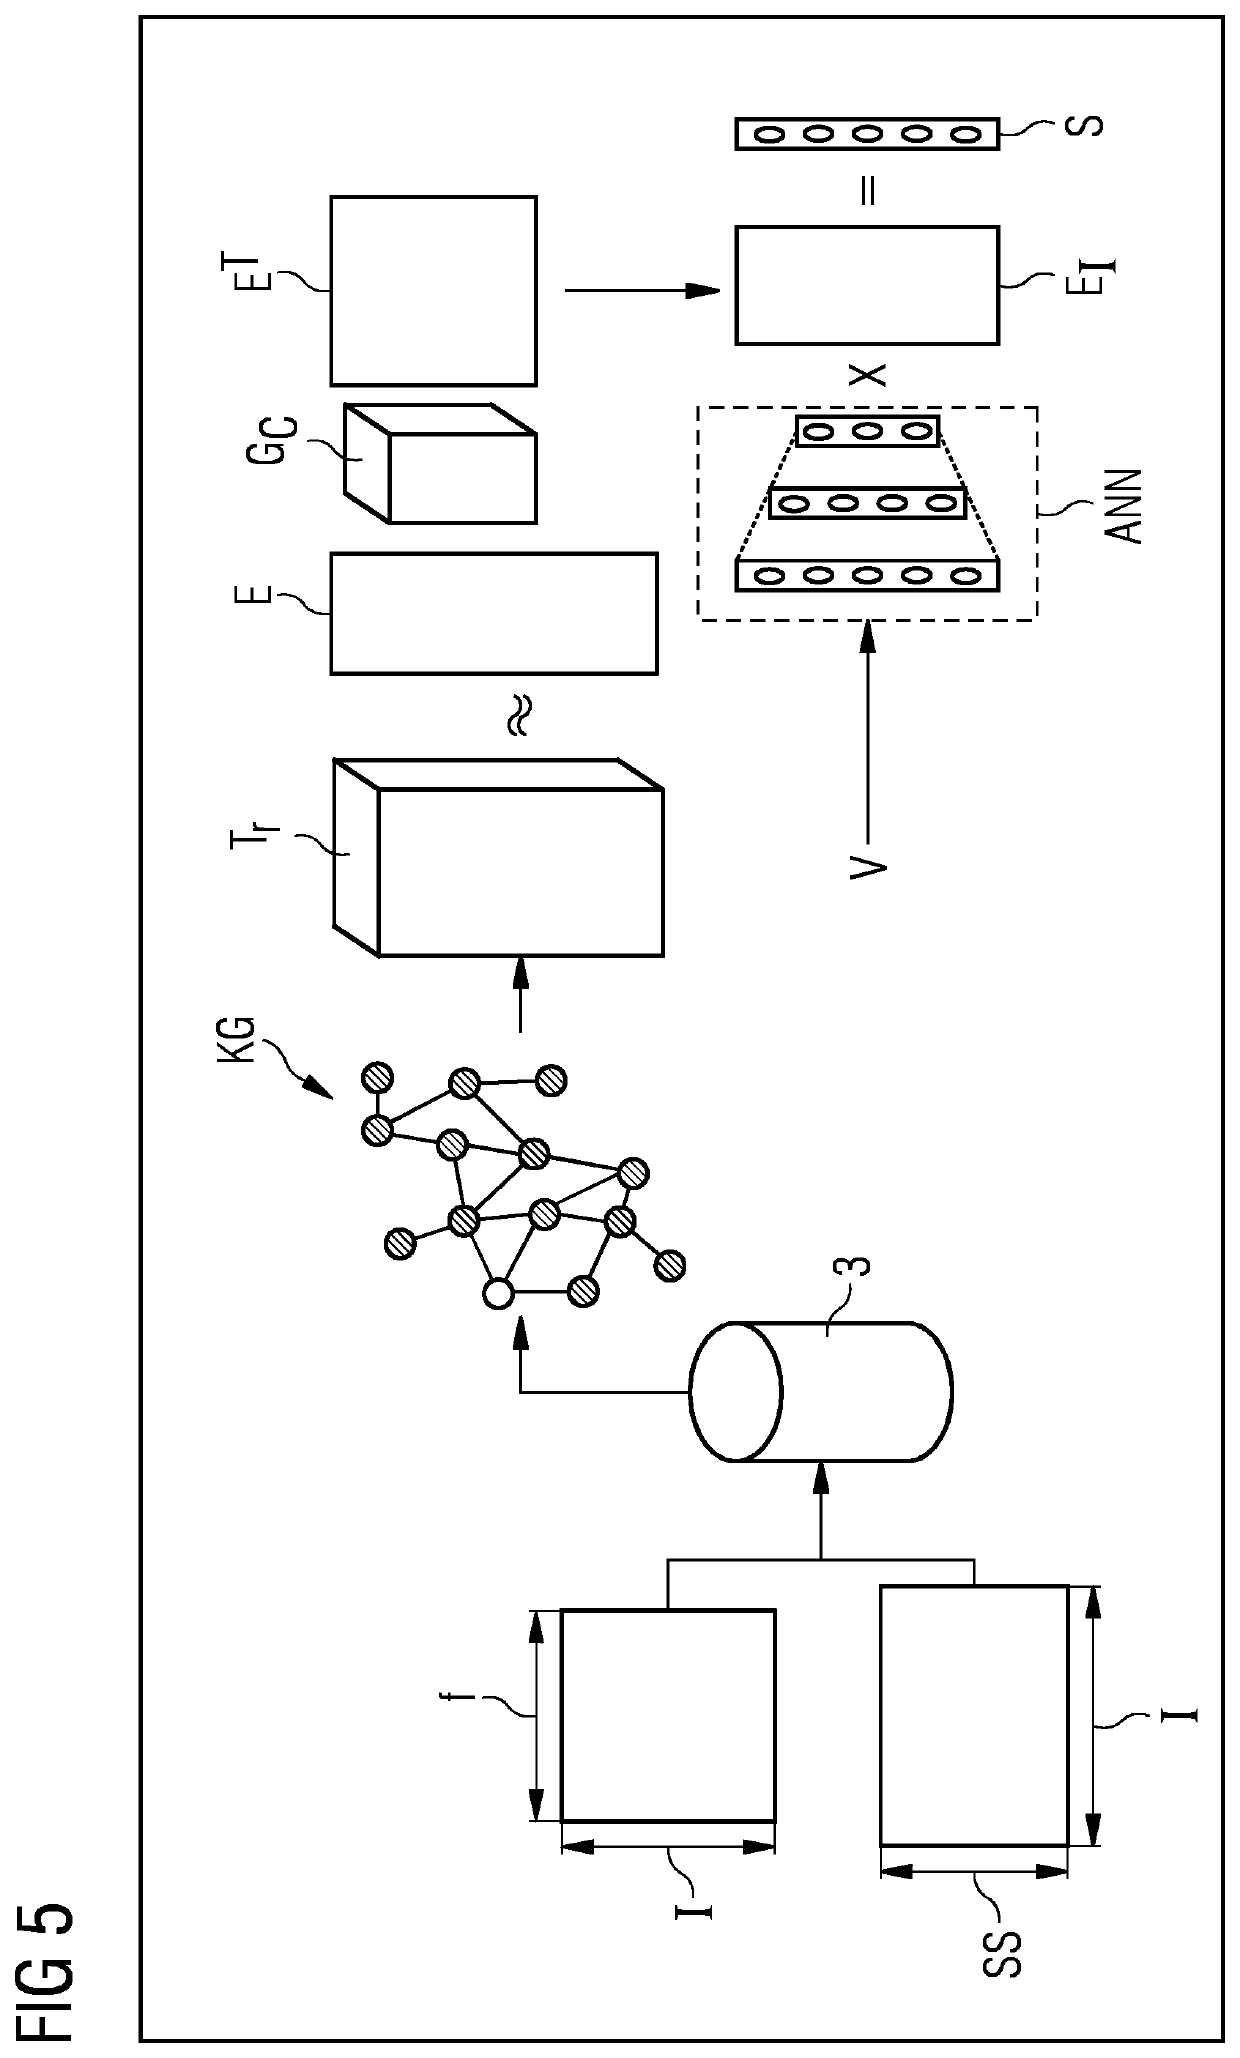 Platform for selection of items used for the configuration of an industrial system